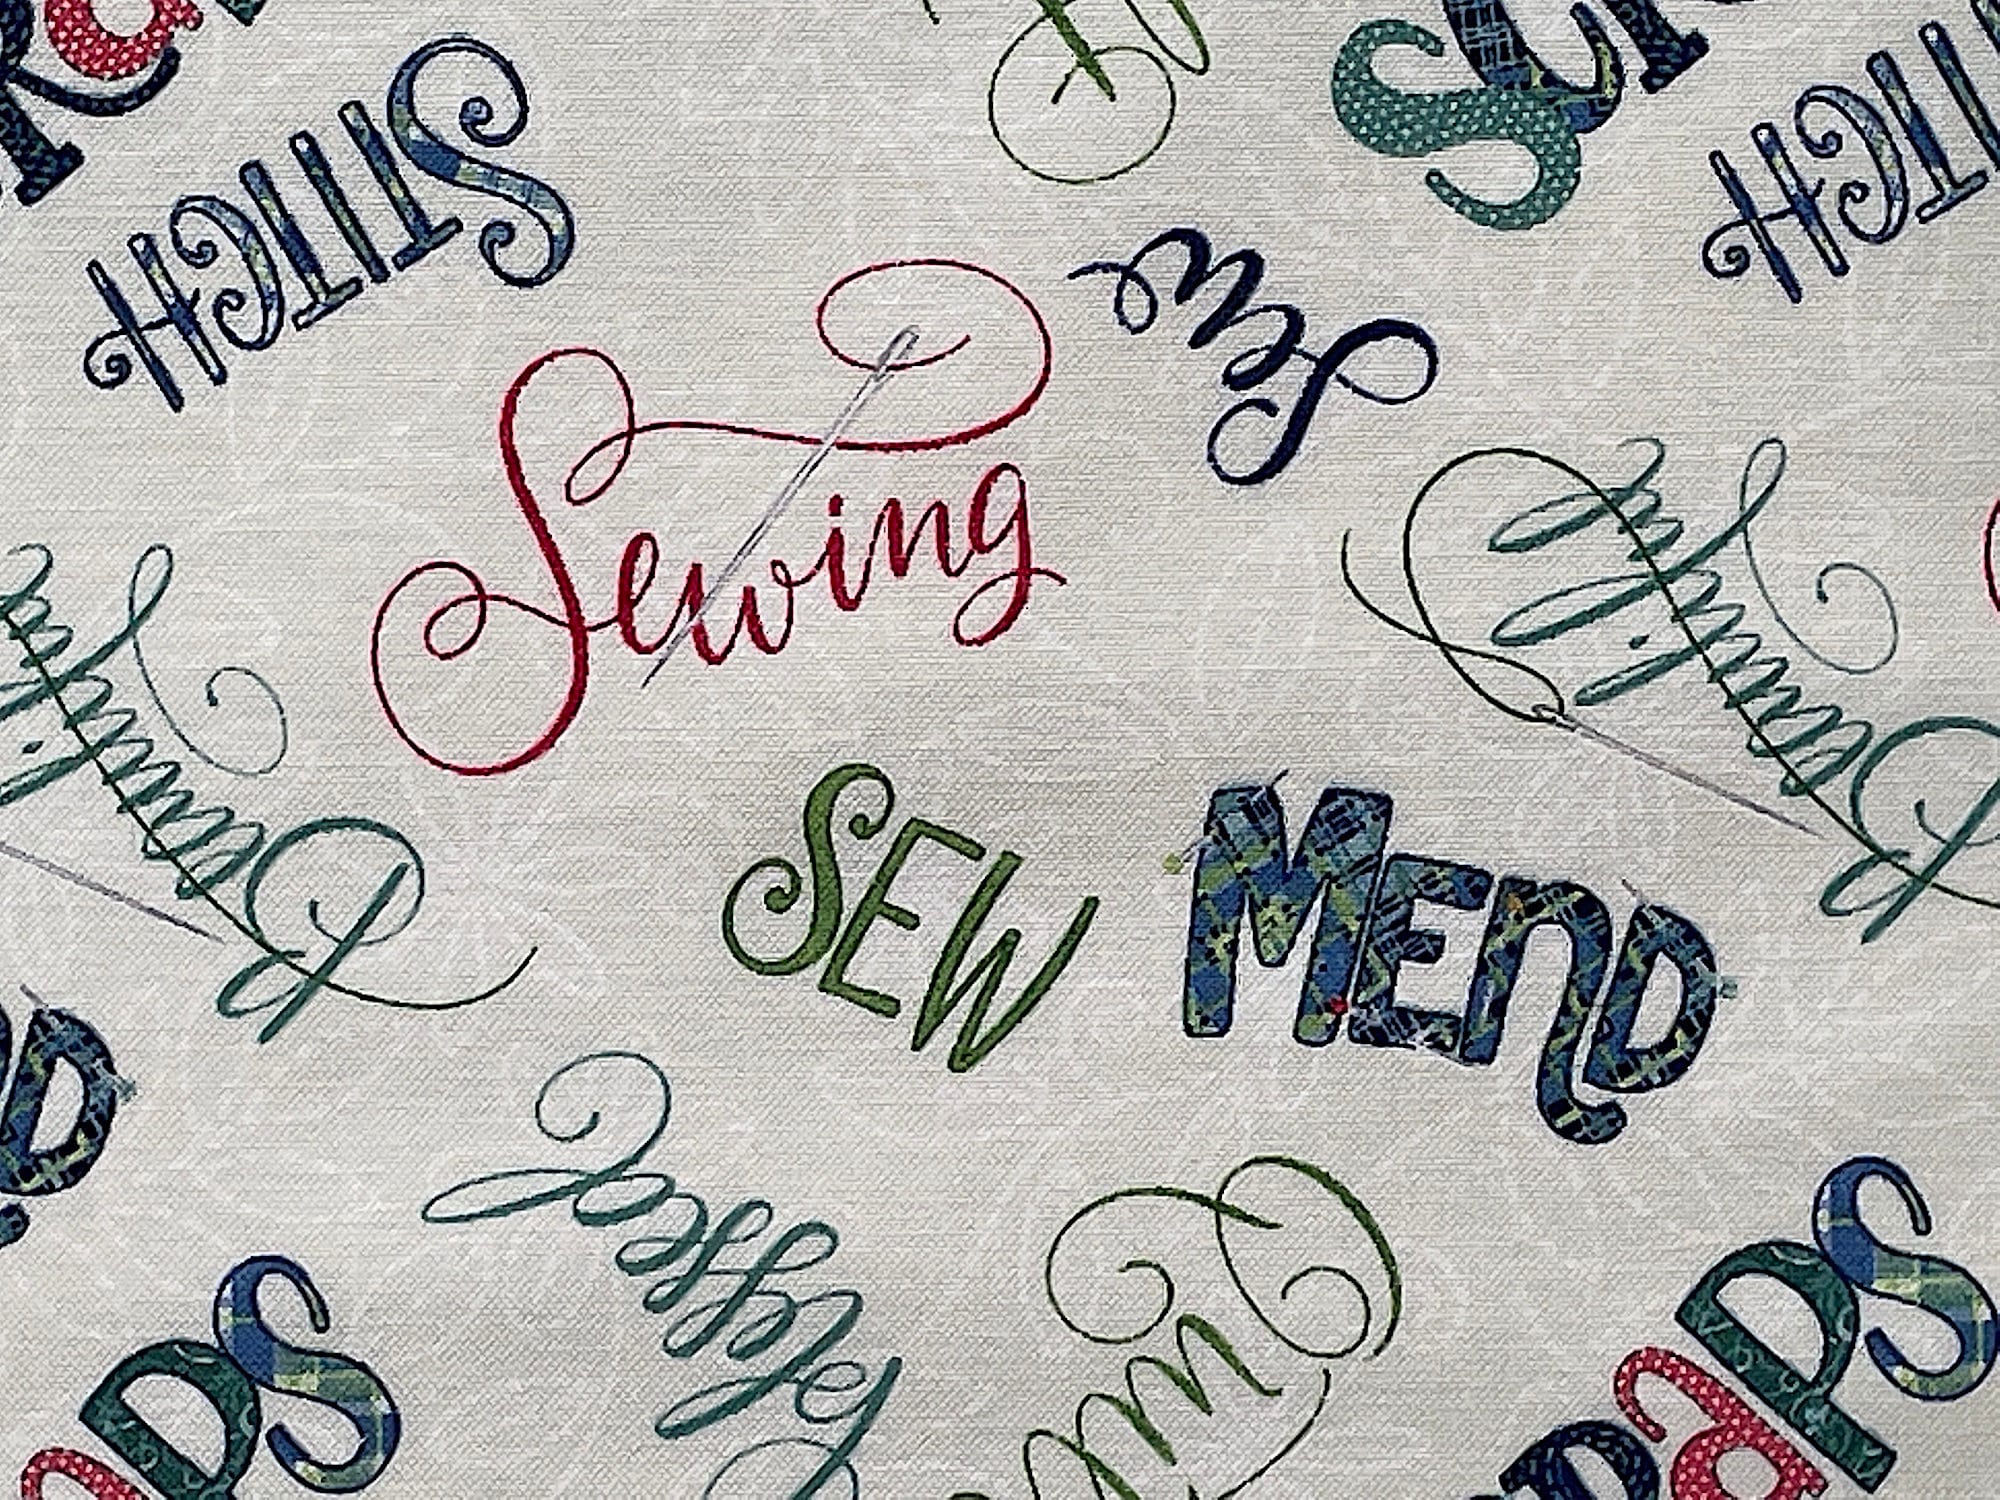 This is one of the Sew Little Time Collection. The color is off-white with the words, Scraps, Stitch, Sew, Sewing, Mend, and Quilt.